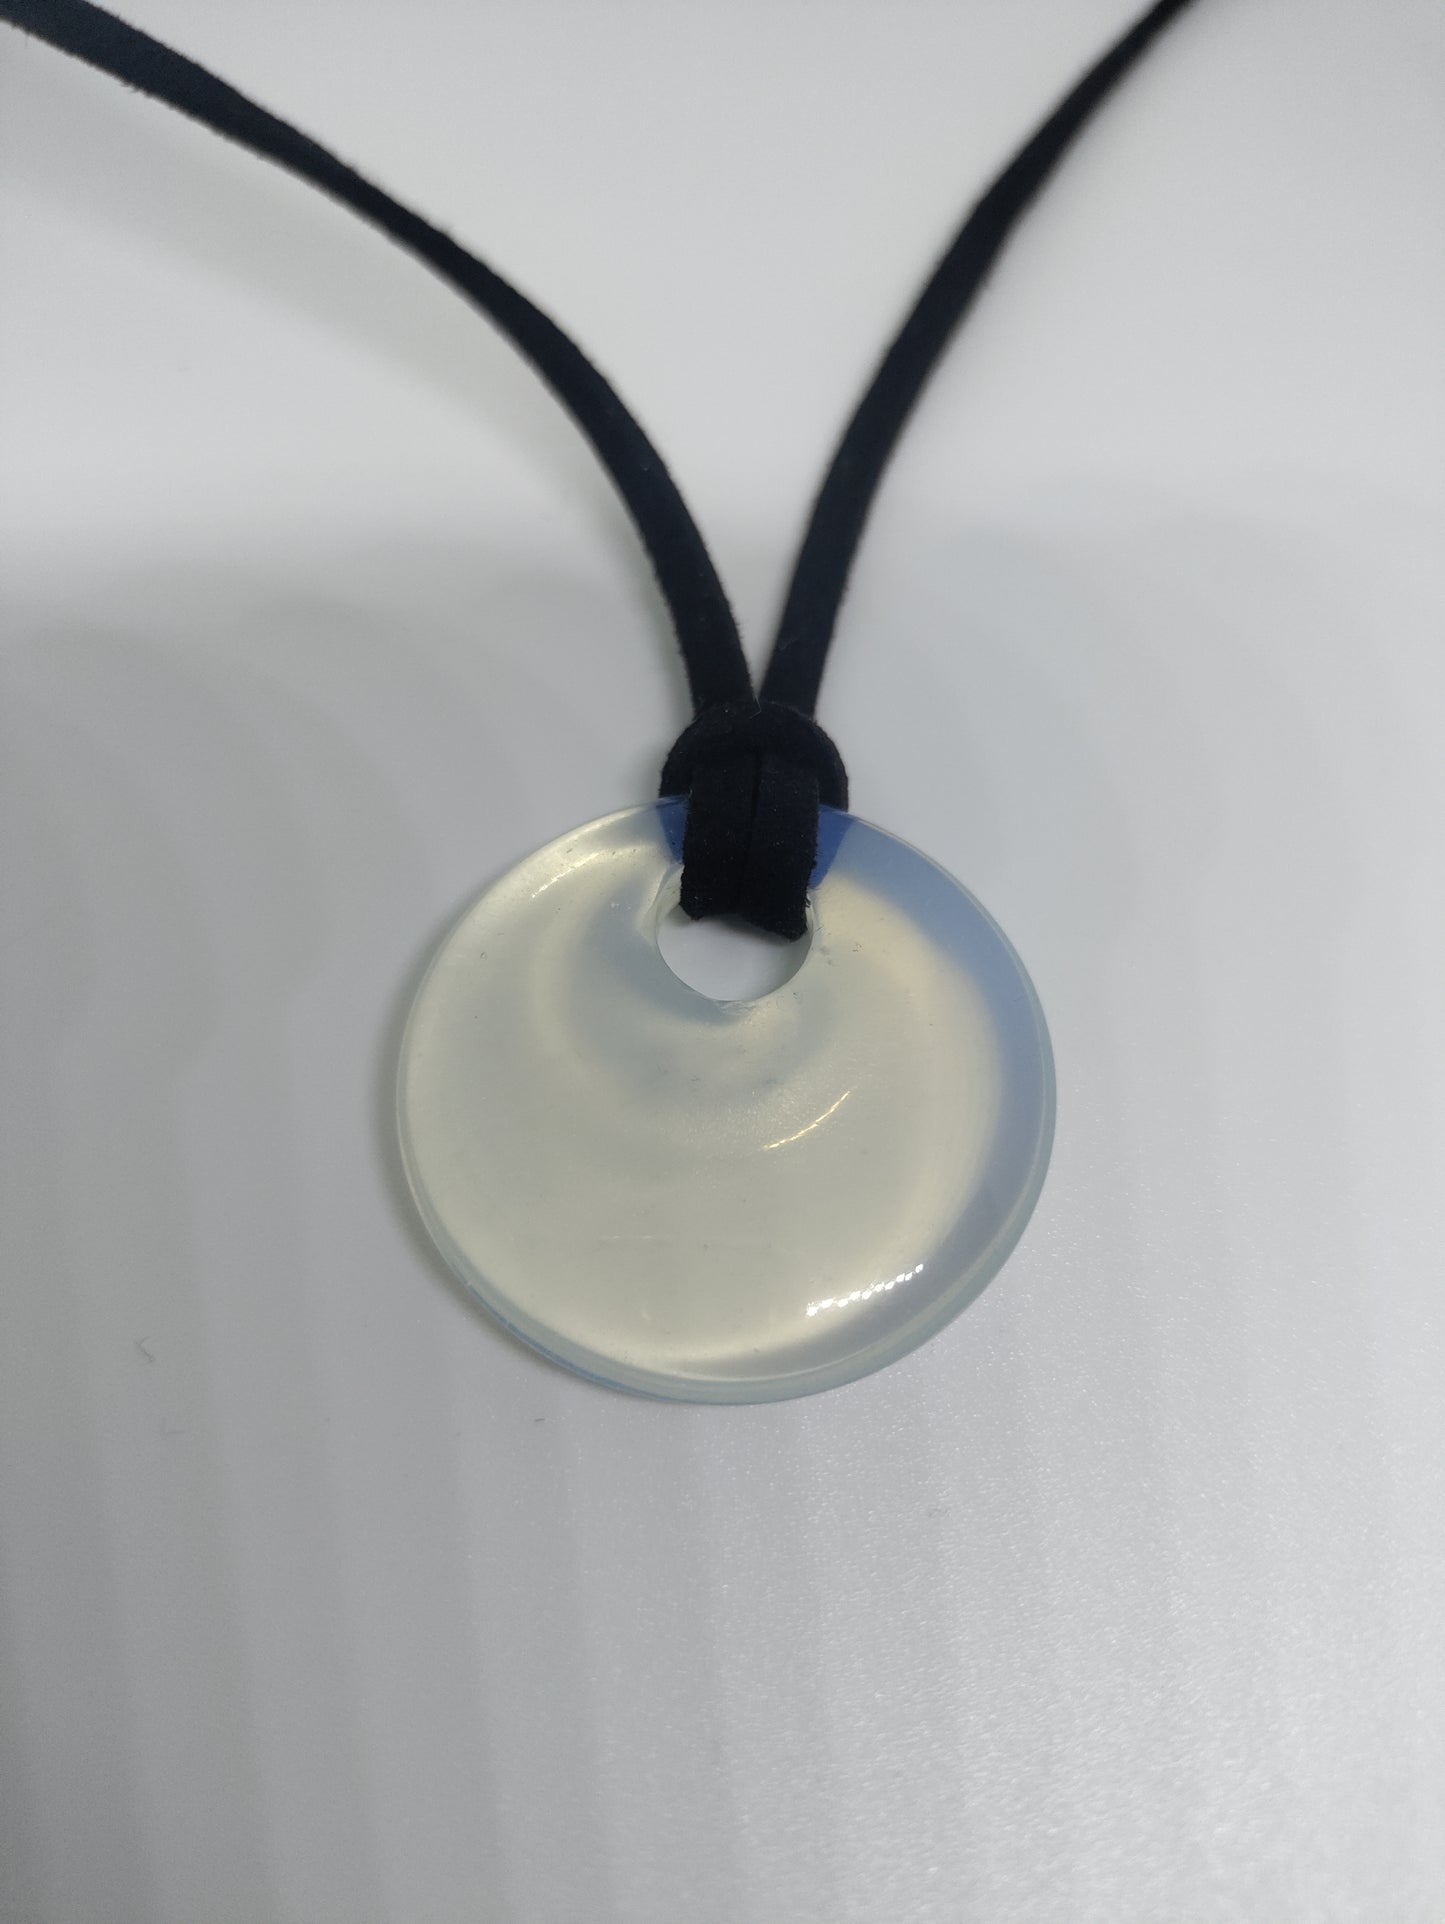 Necklace with round Opalite stone LEIA&CO